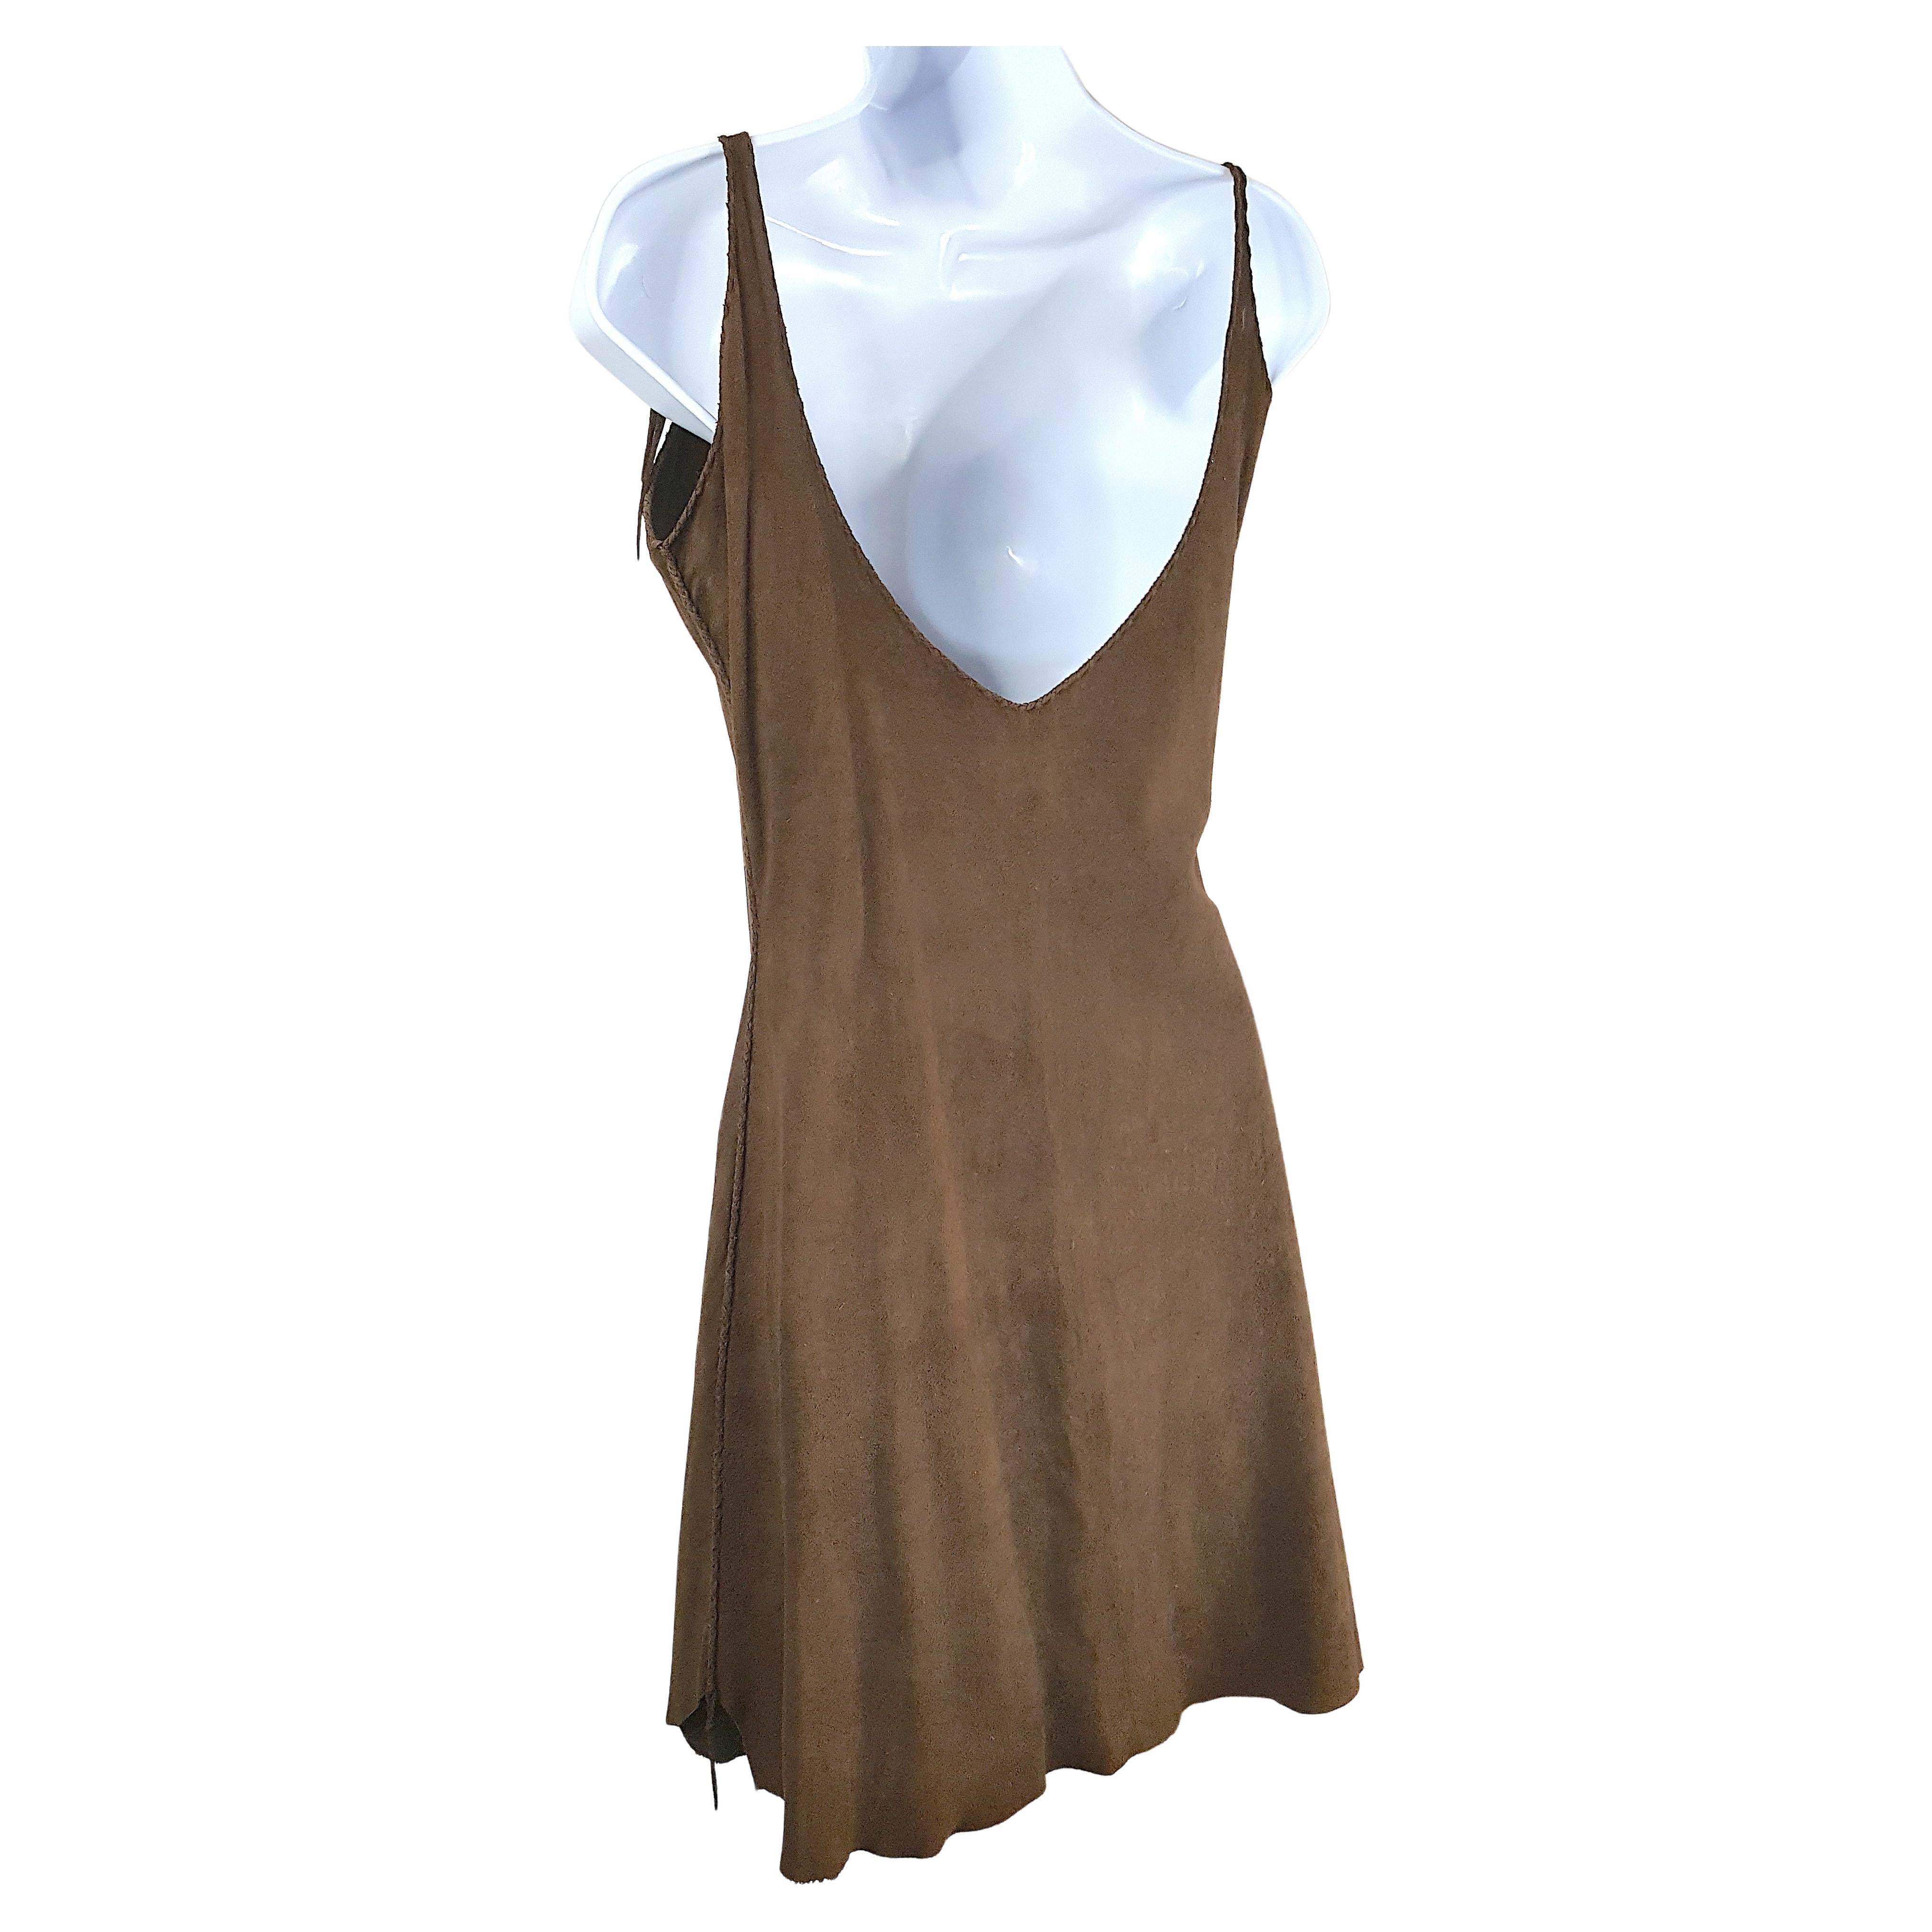 This antique Native American brown chamois suede leather sleeveless chemise dress, which was handmade during the 